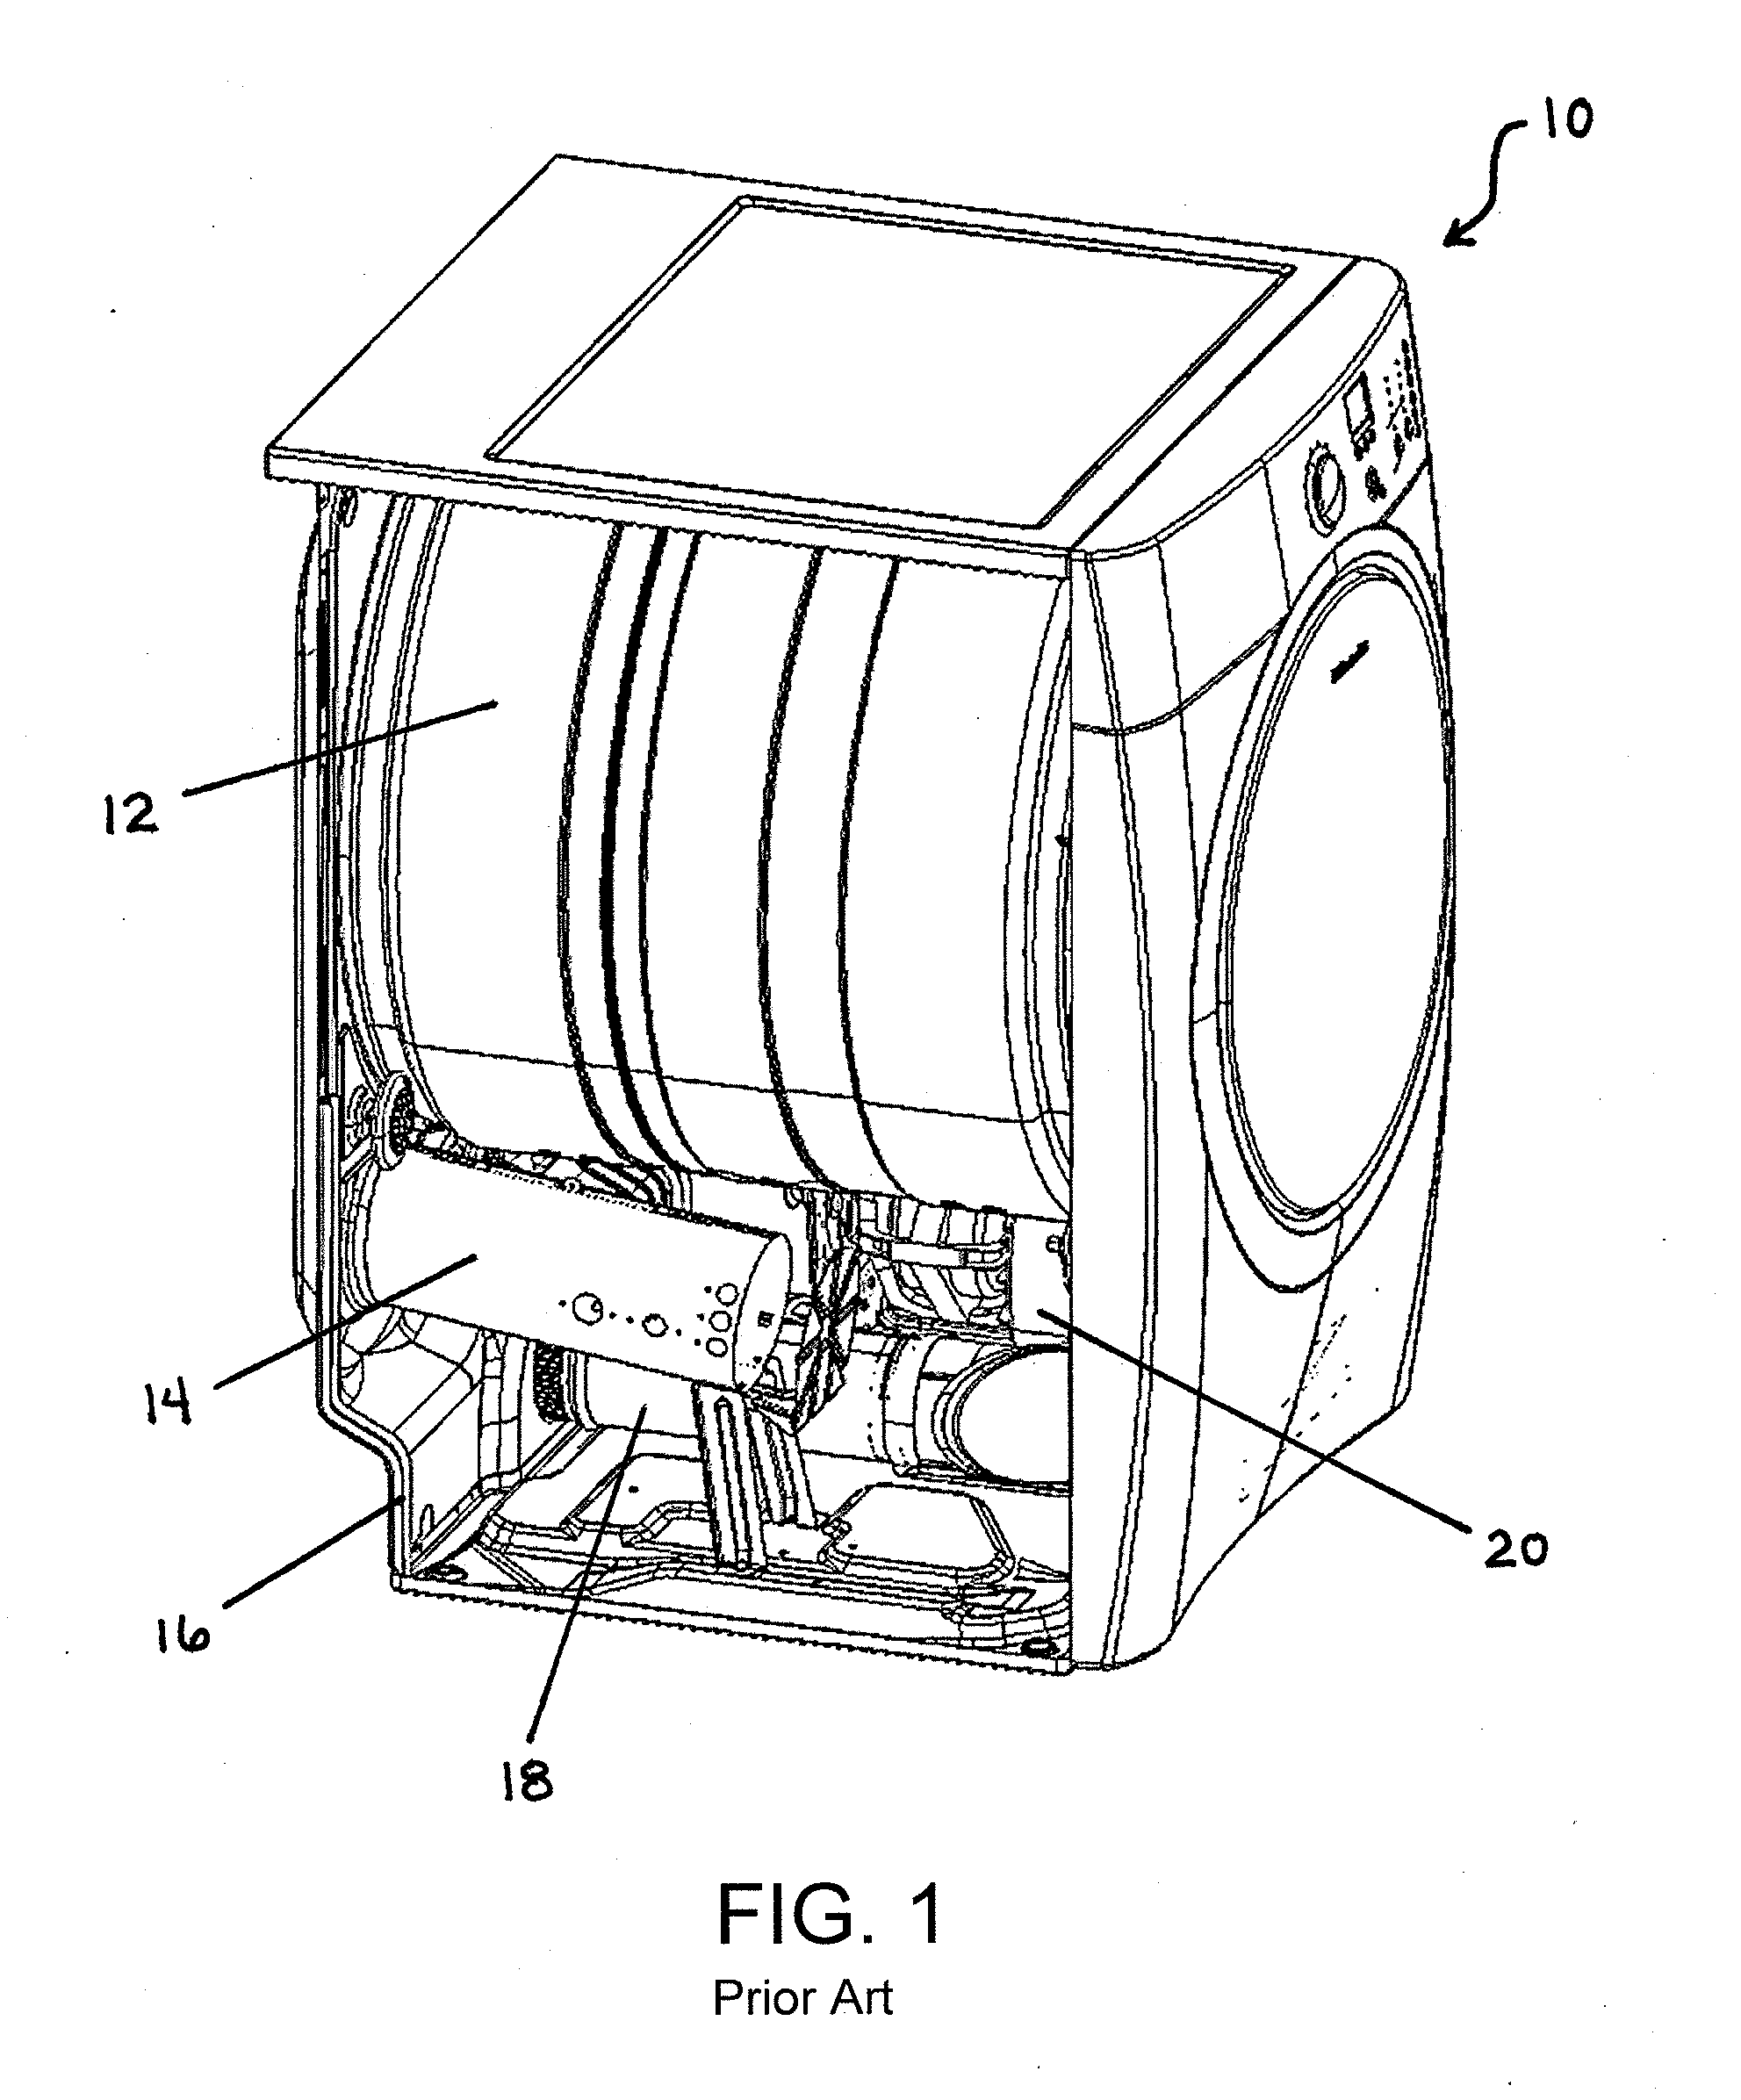 Dryer with Air Recirculation/Heat Exchange Subassembly